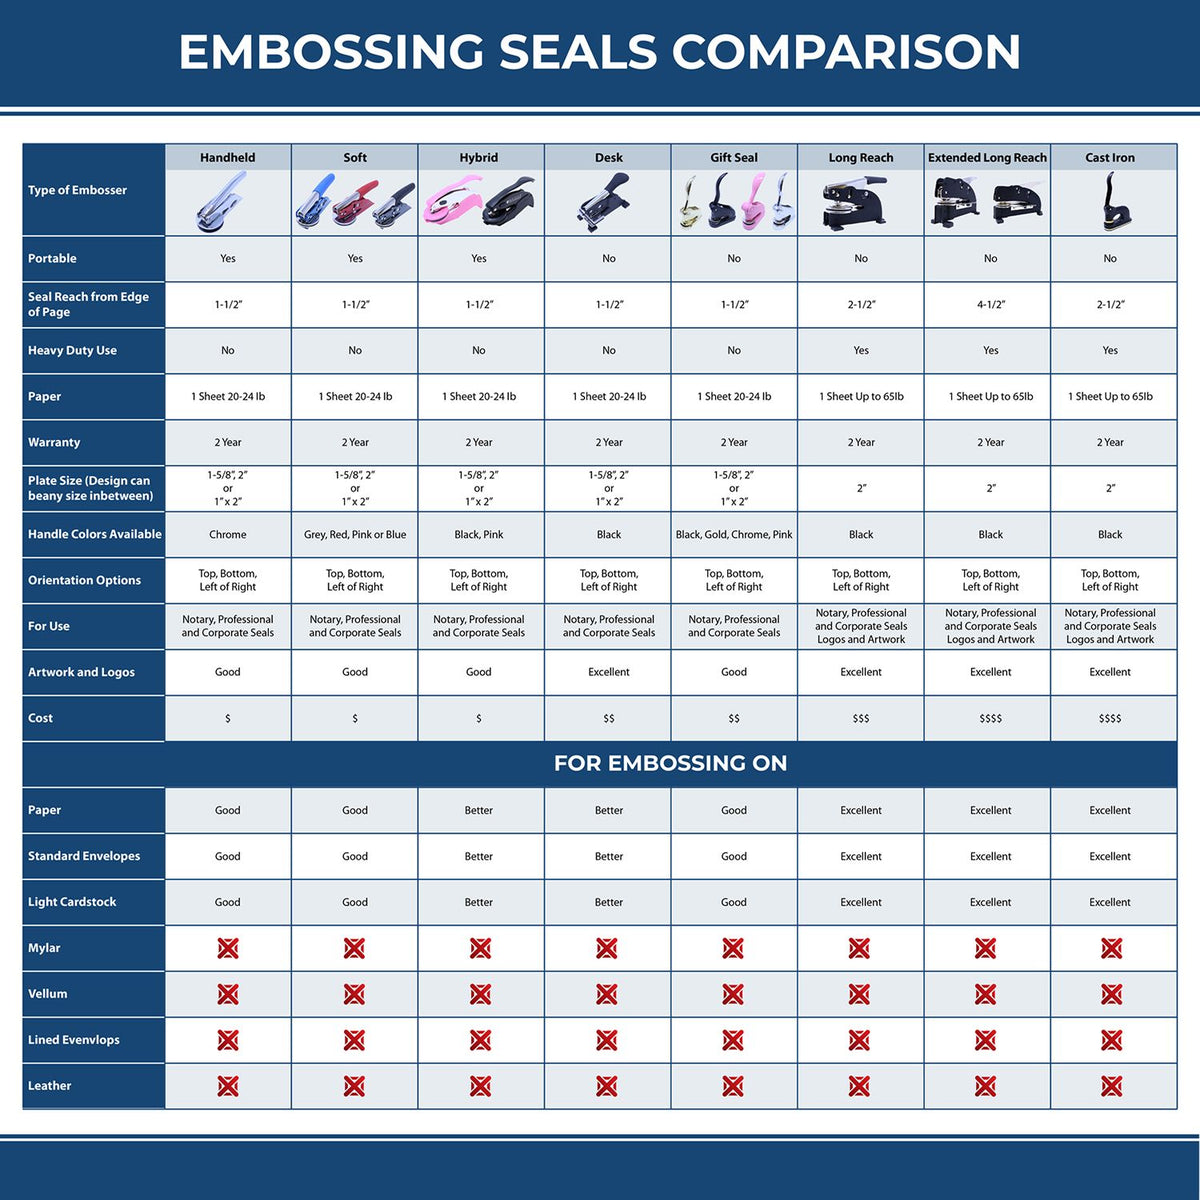 A comparison chart for the different types of mount models available for the Gift Arizona Land Surveyor Seal